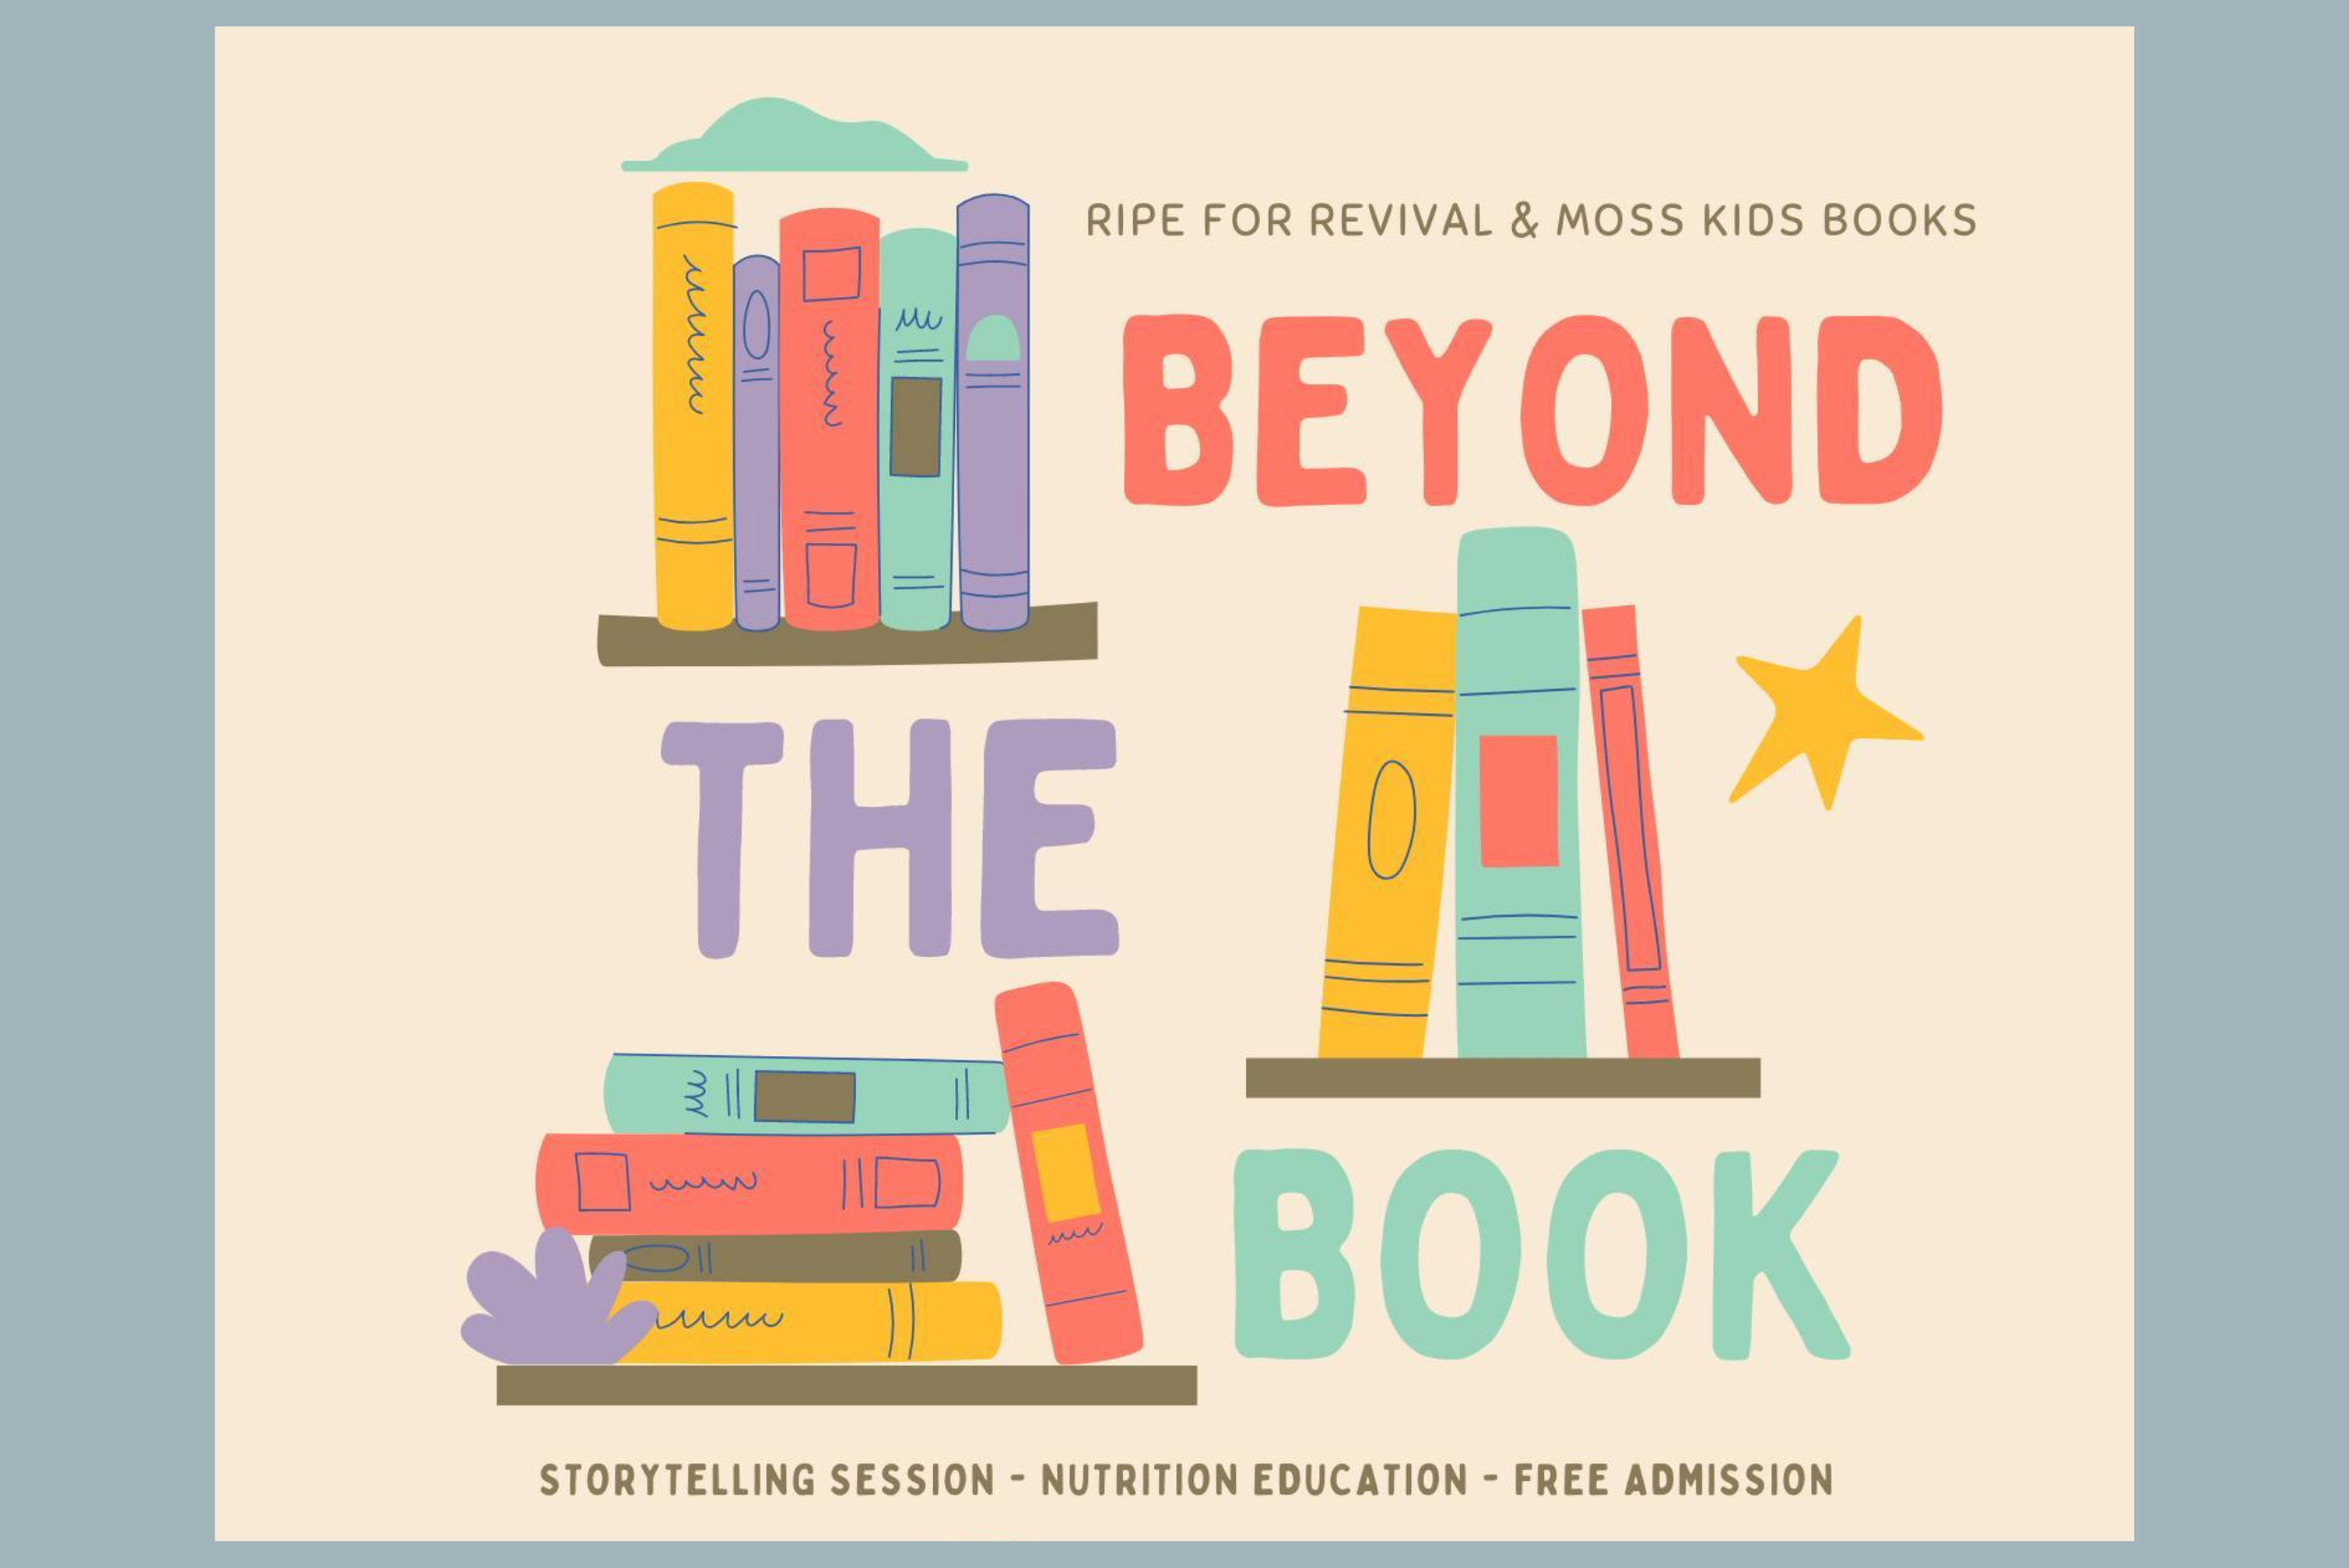 Beyond the Book with Ripe Revival & Moss Kids Books